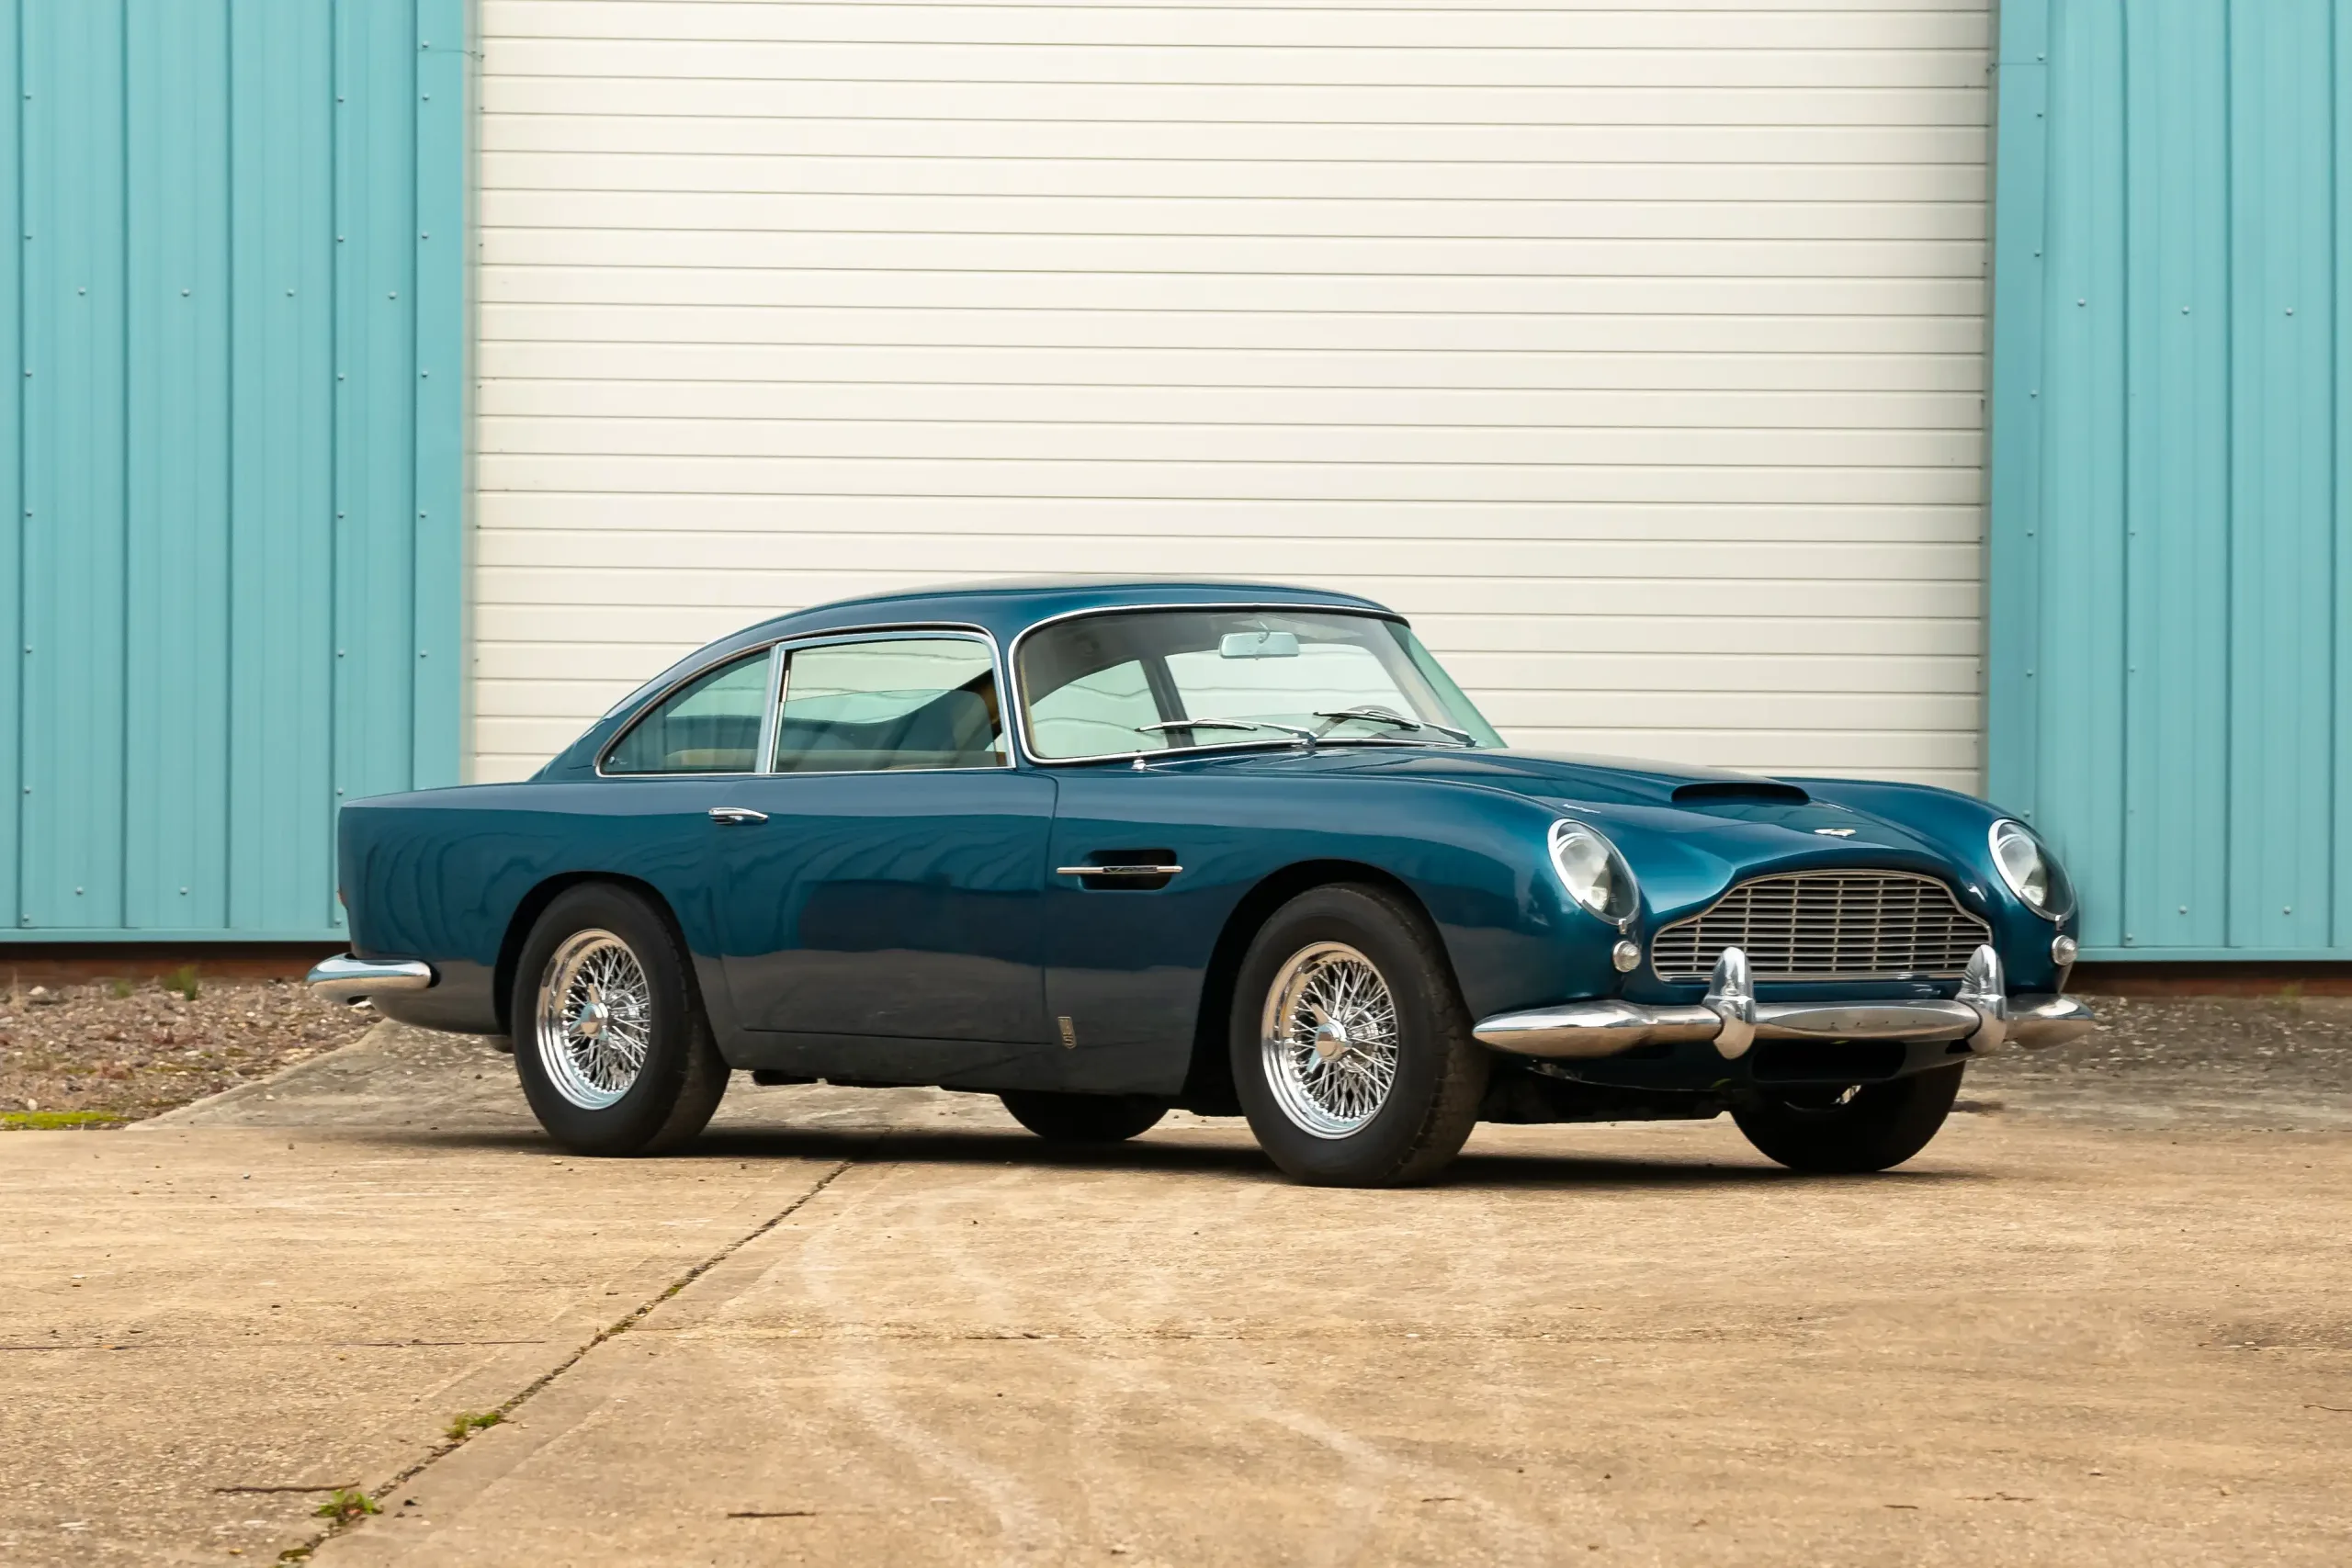 Rare Aston Martin kept in storage for 16 years set to sell for £740,000